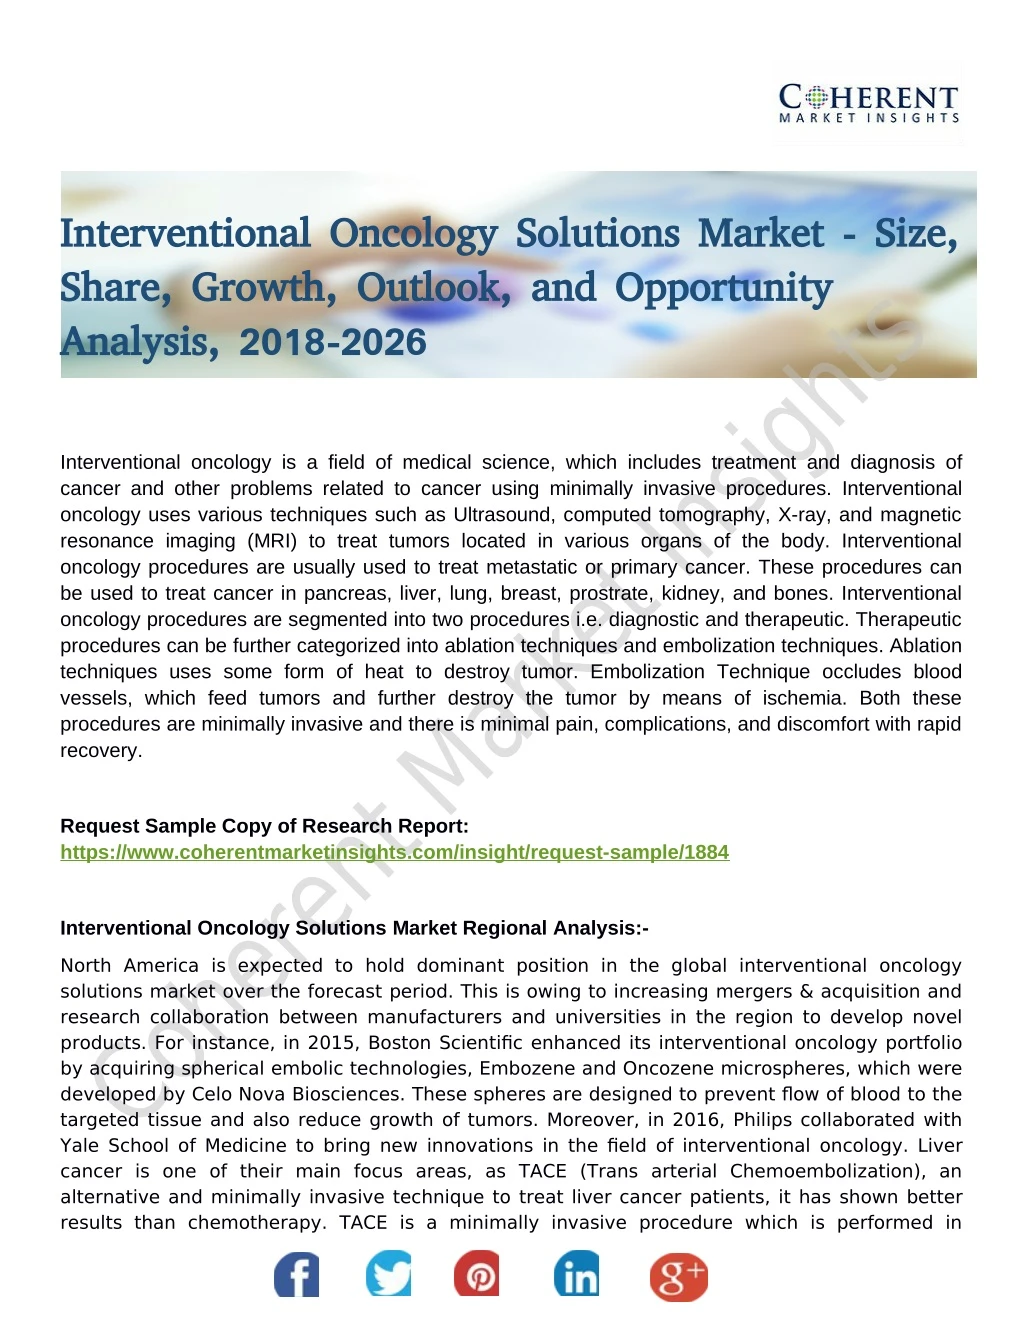 interventional oncology solutions market size